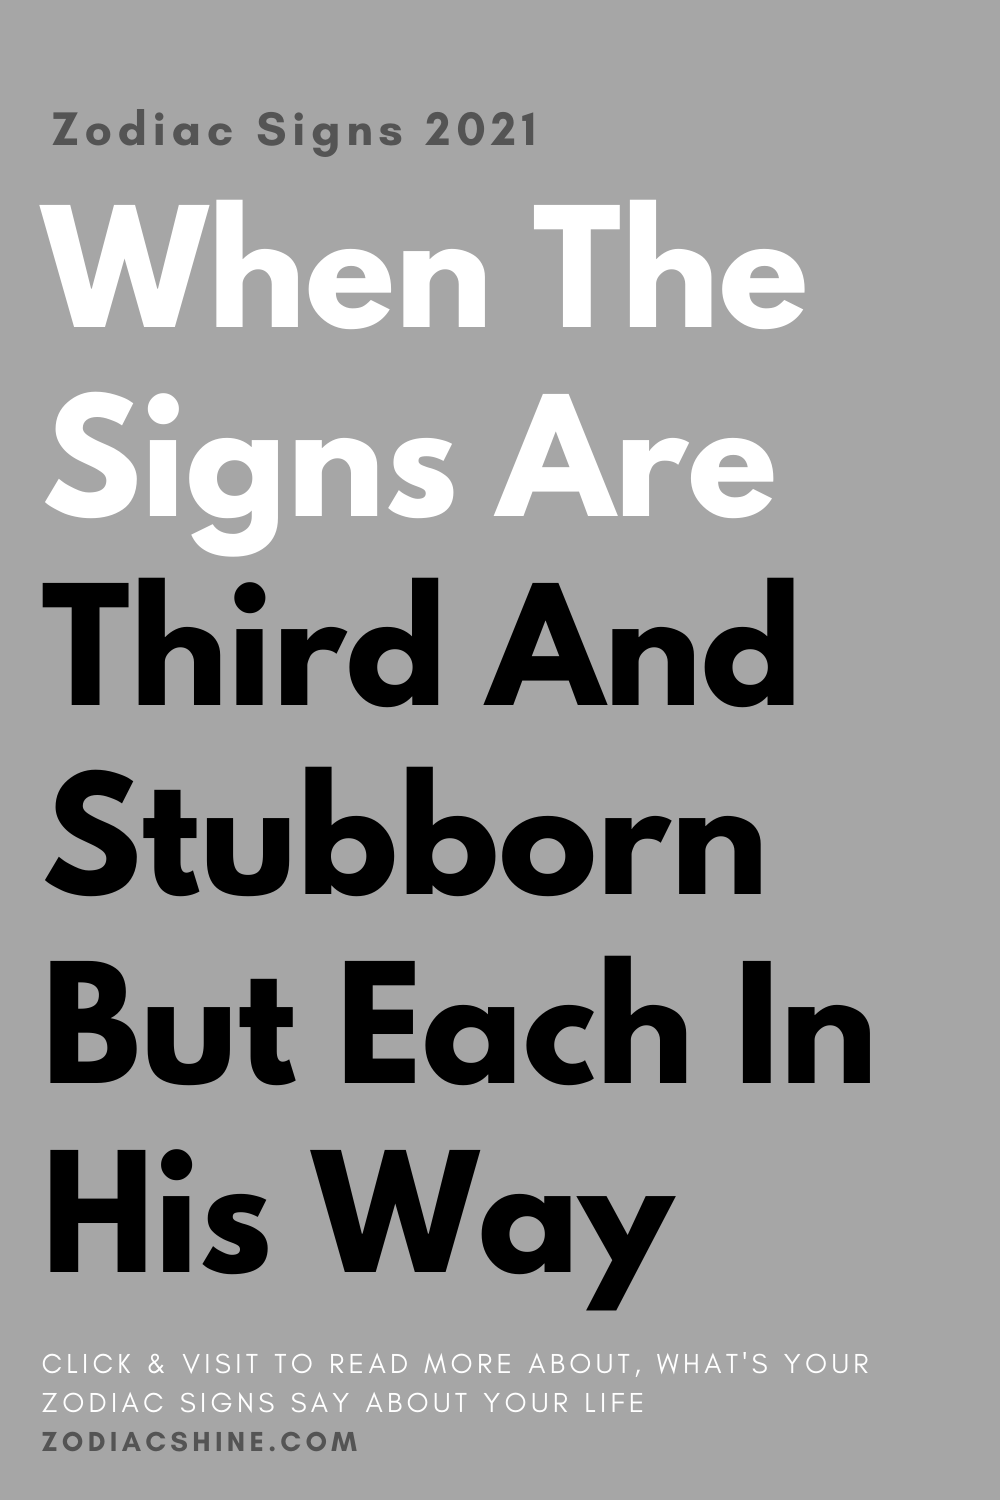 When The Signs Are Third And Stubborn But Each In His Way